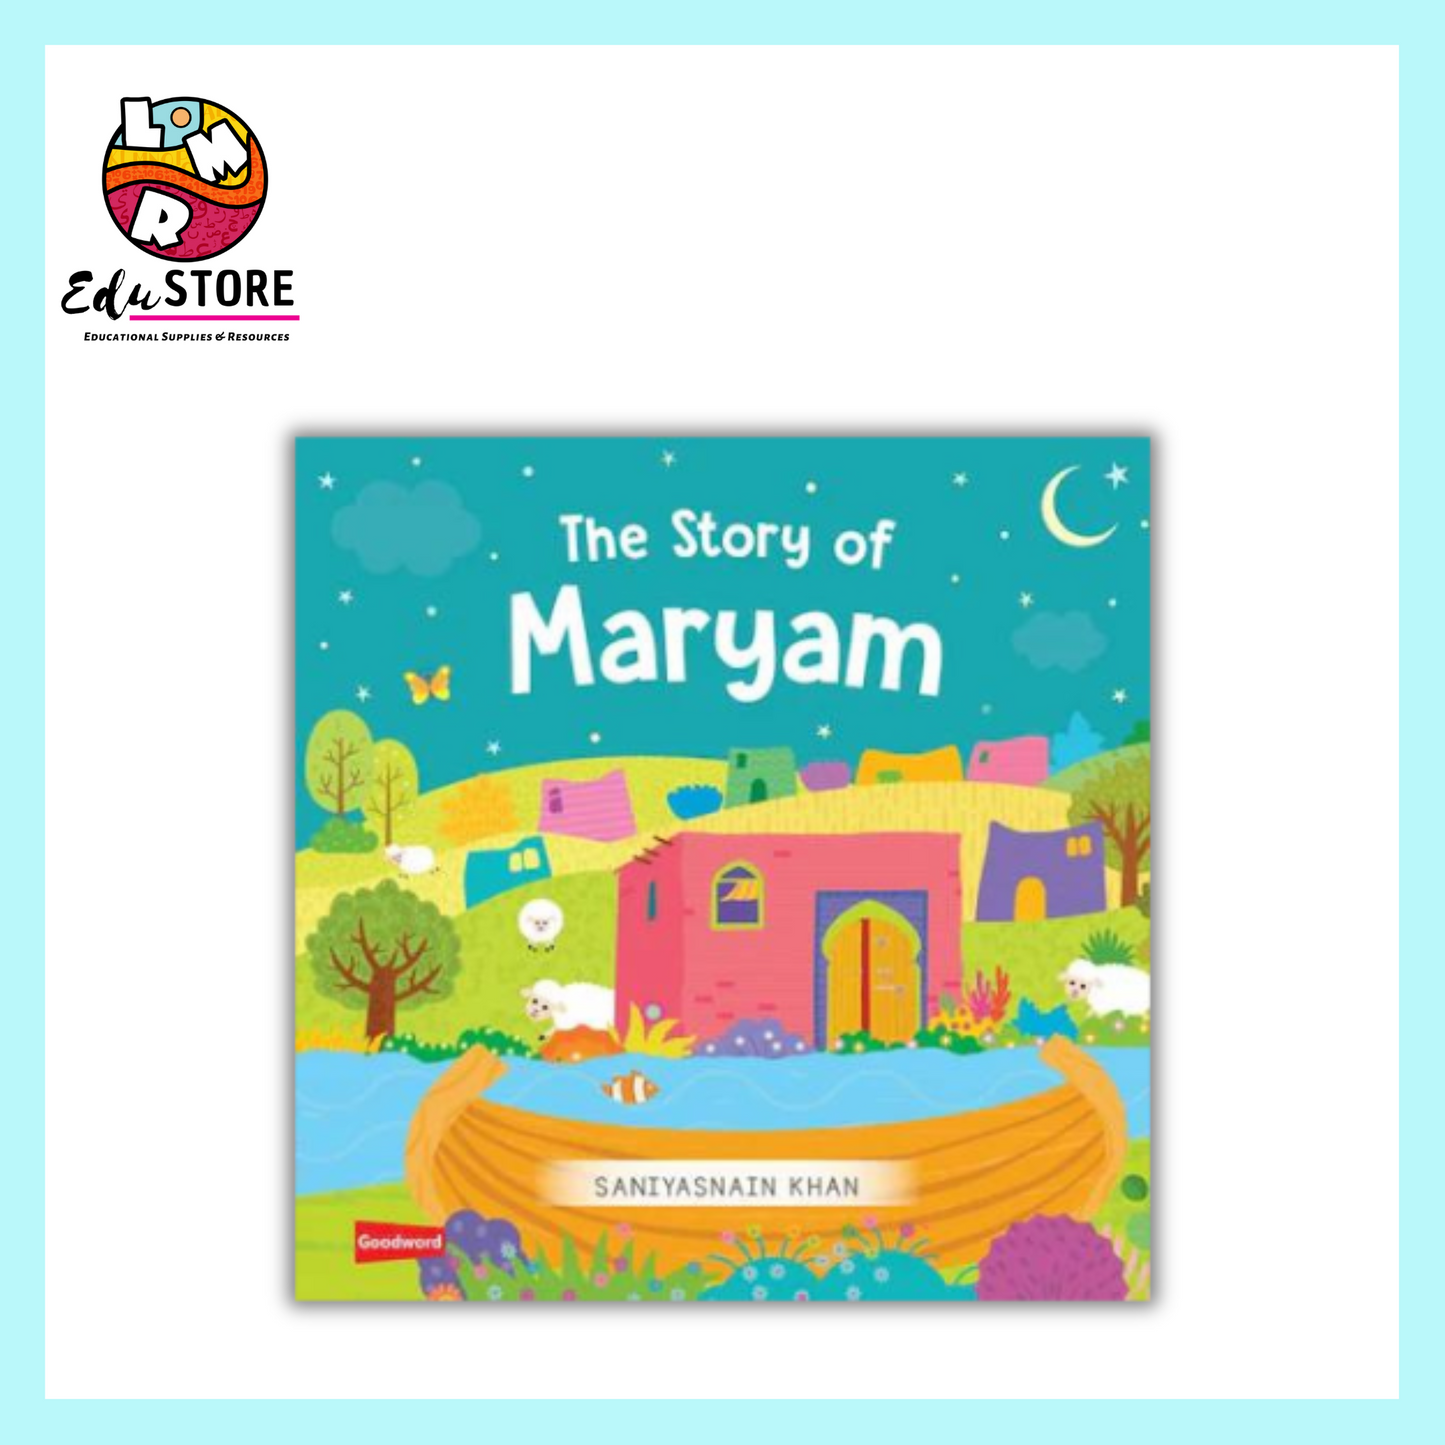 The Story of Maryam (Board Book)